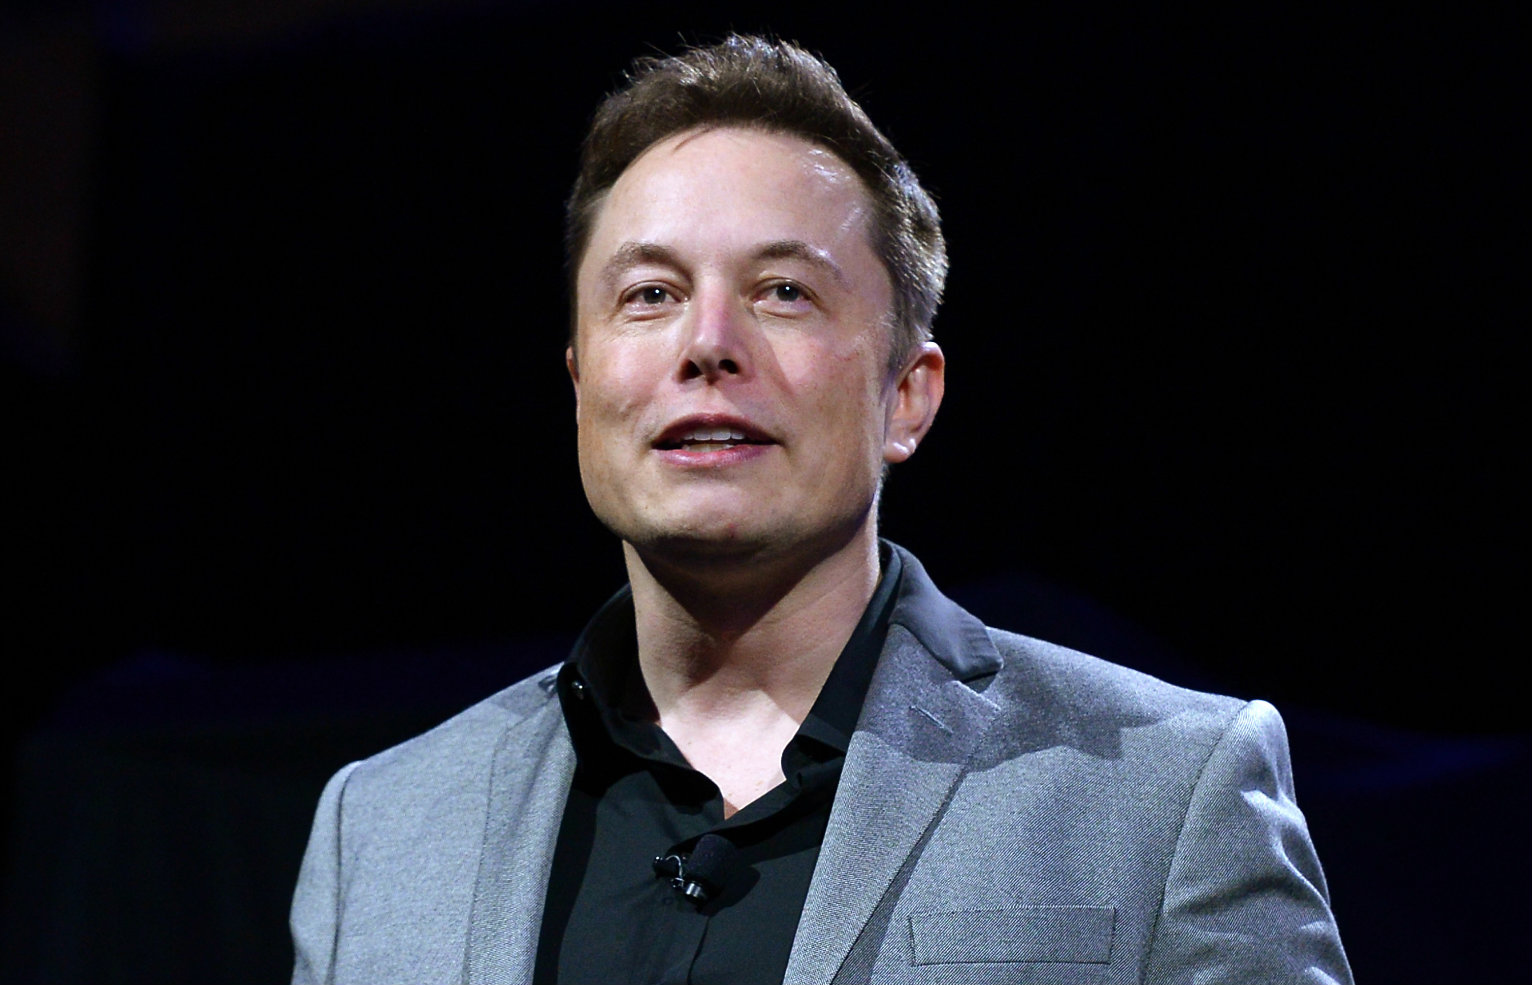 Elon Musk Net Worth 2020 / How Elon Musk Newly The 4th Richest Person In America Spends His Fortune - We broke down his complicated $187 billion wealth into 2 simple charts.